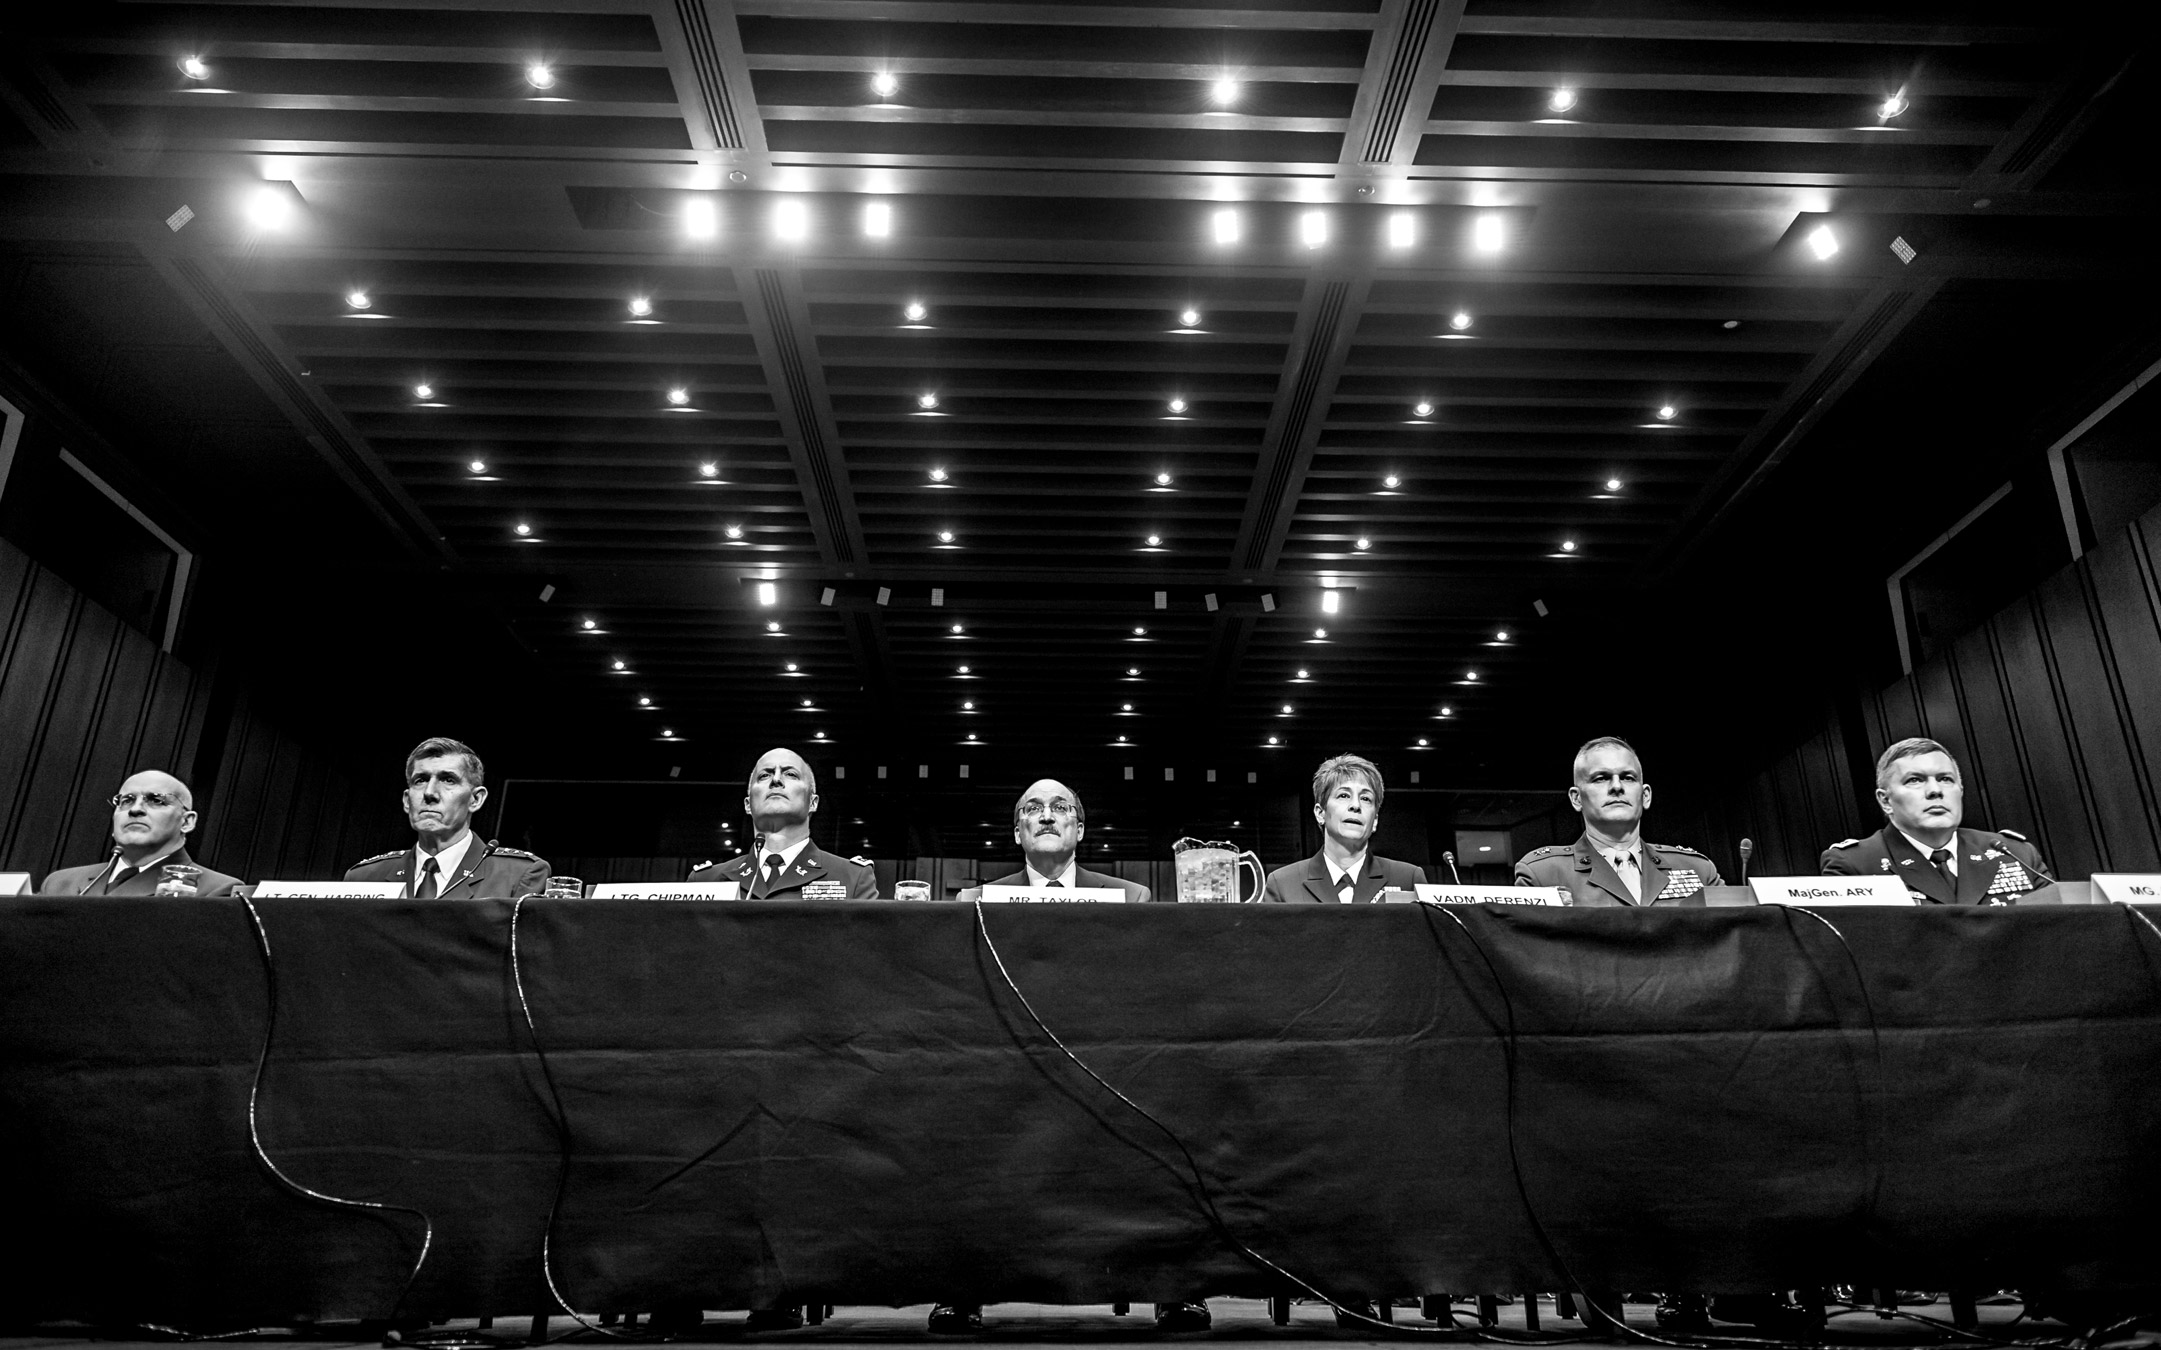 Military lawyers from the US Air Force, Army, Navy, Marines, and Coast Guard are grilled by lawmakers during a Senate Armed Services Committee hearing to discuss sexual assaults in the US Armed Forces